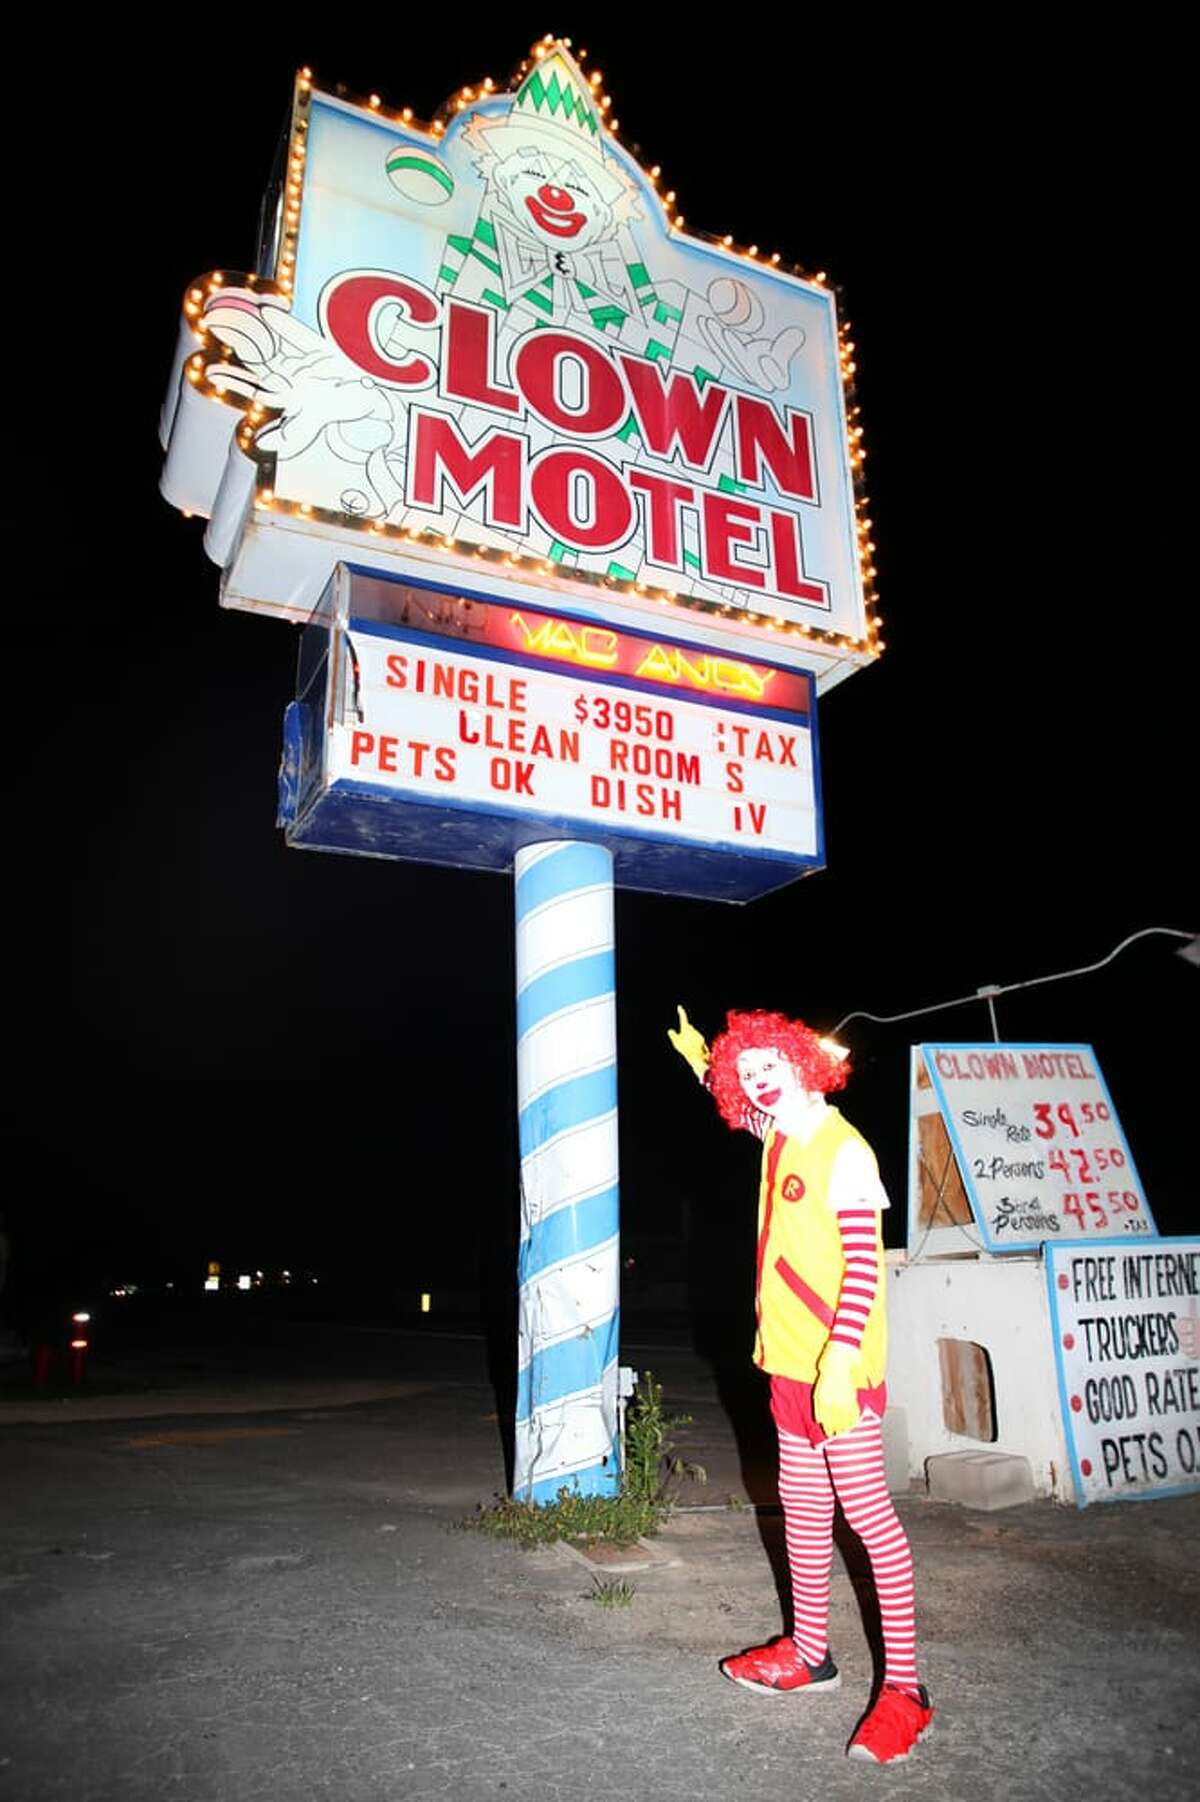 Nightmarish Clown Motel Next To Town Cemetery Up For Sale